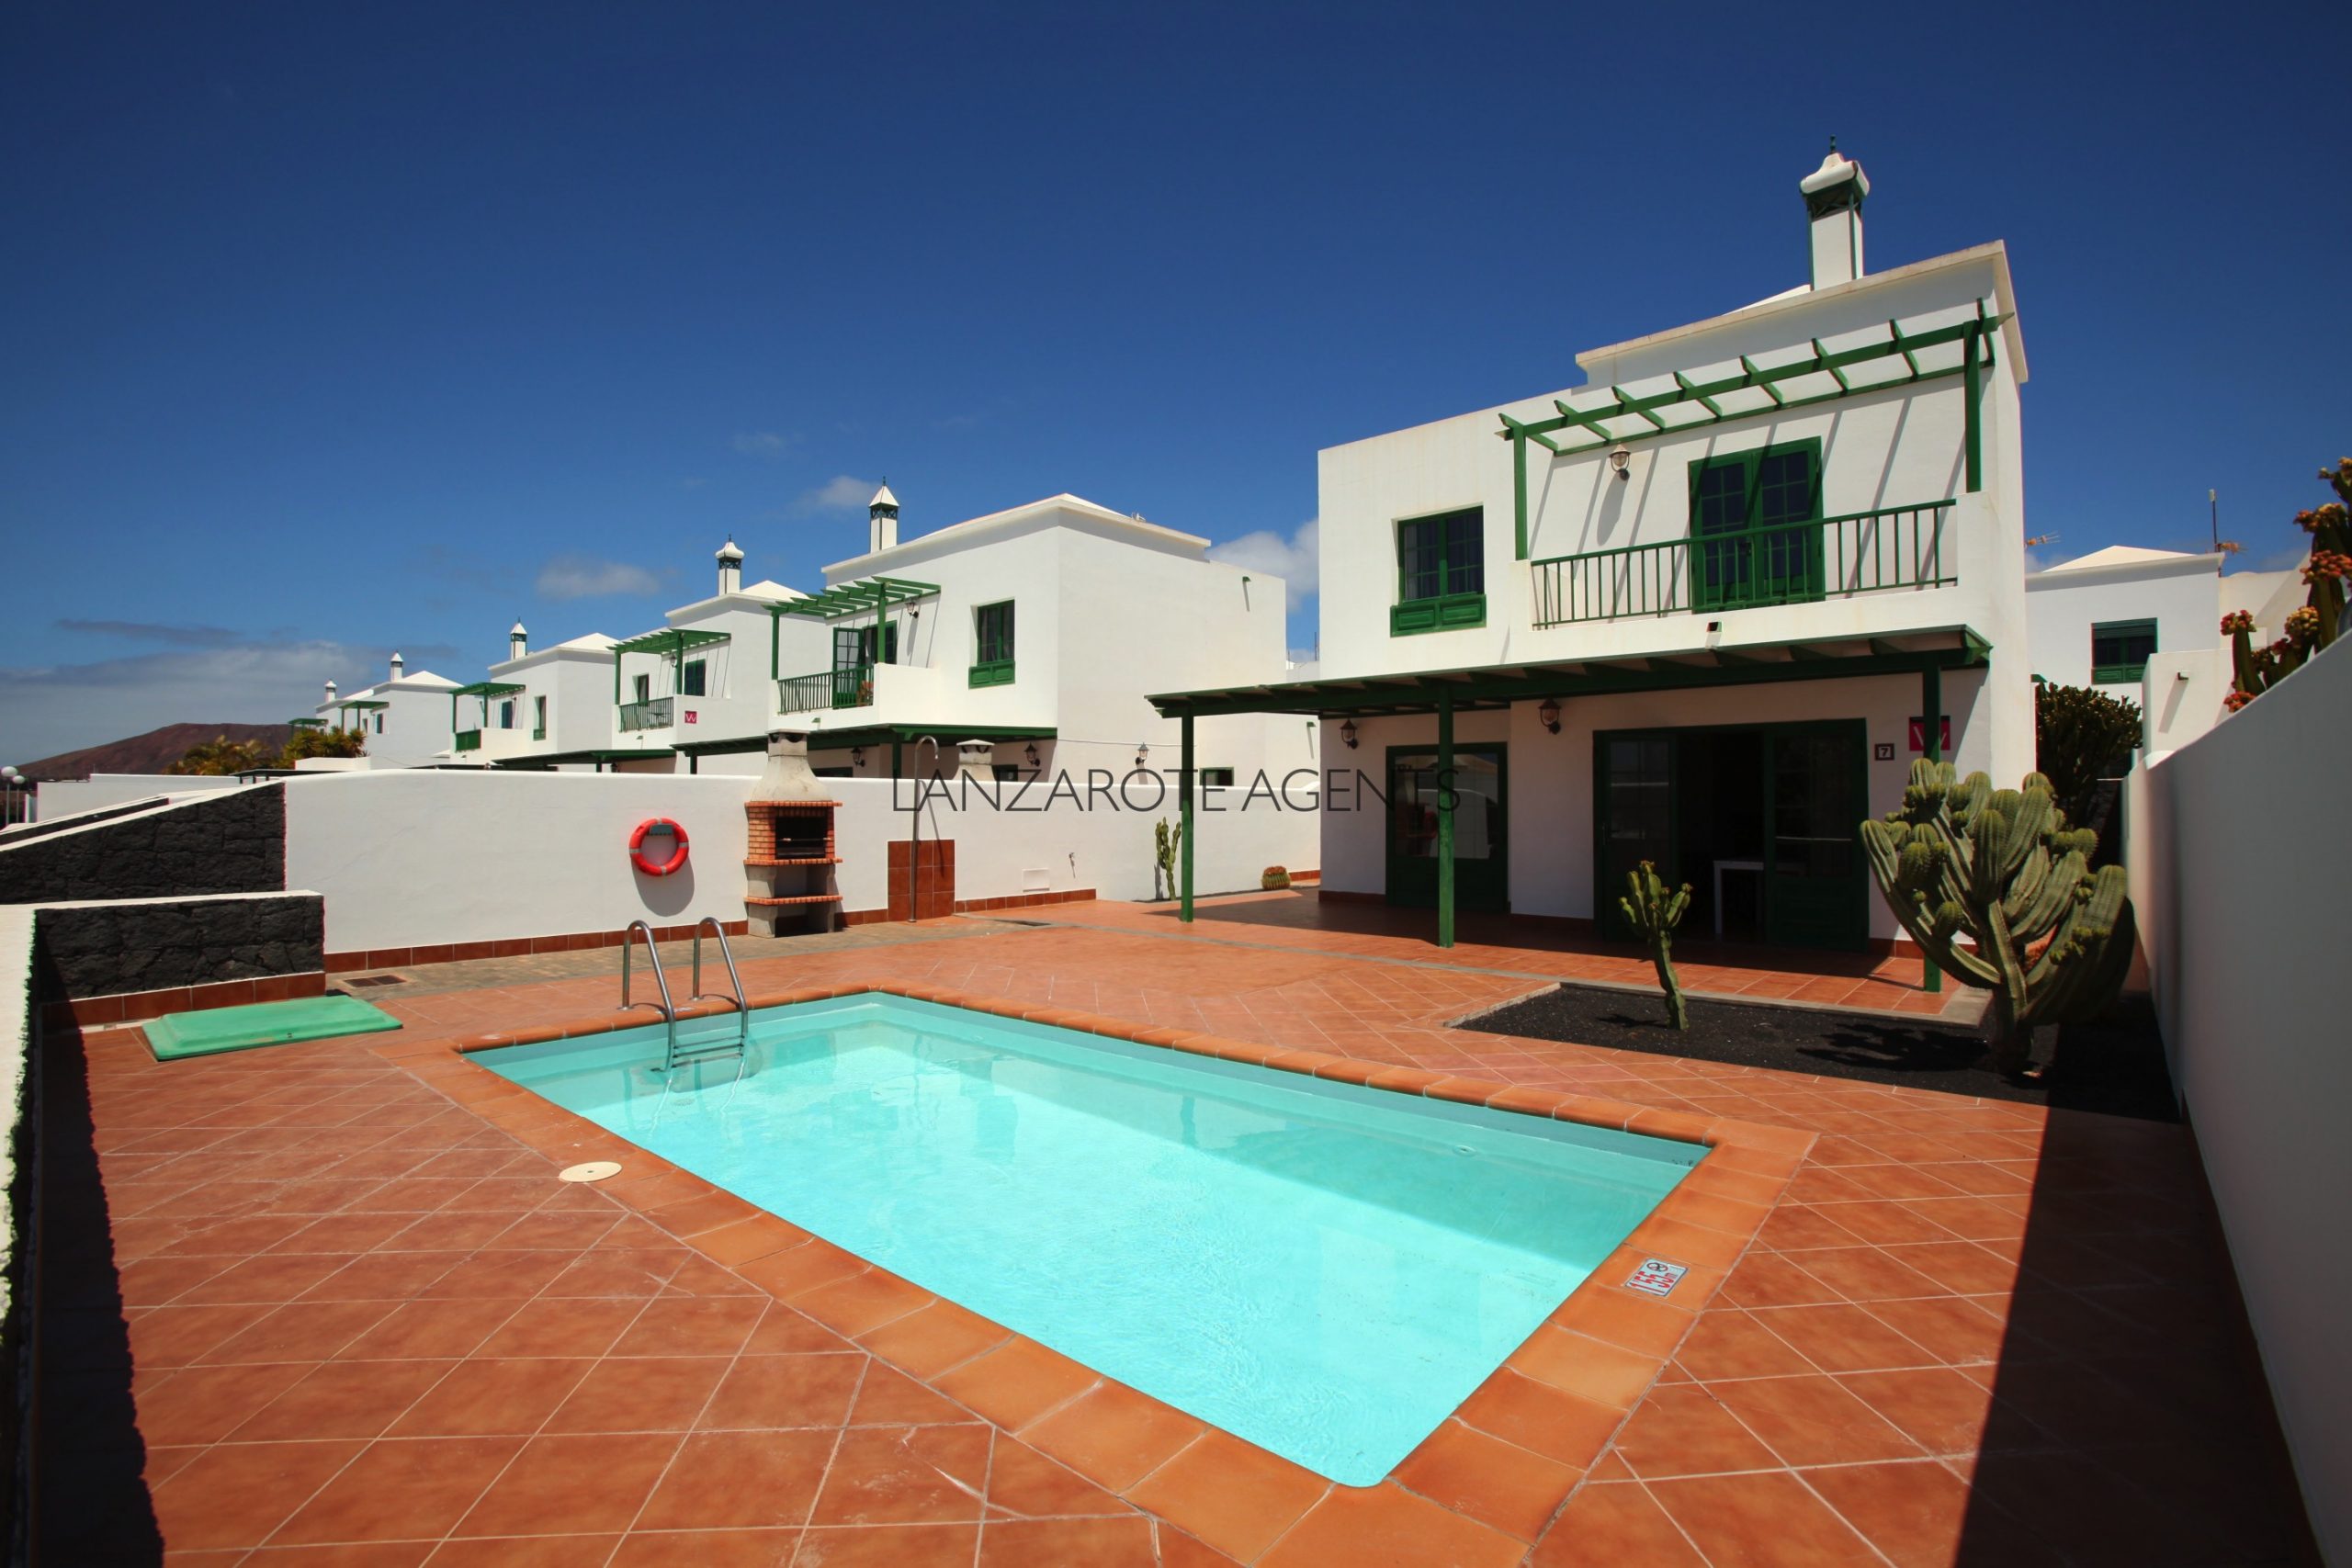 Detached Villa for sale in Lanzarote, Playa Blanca Town Centre 3 Bedroom Villa with Private Pool and Panoramic Views of the Sea and Vv Tourist License